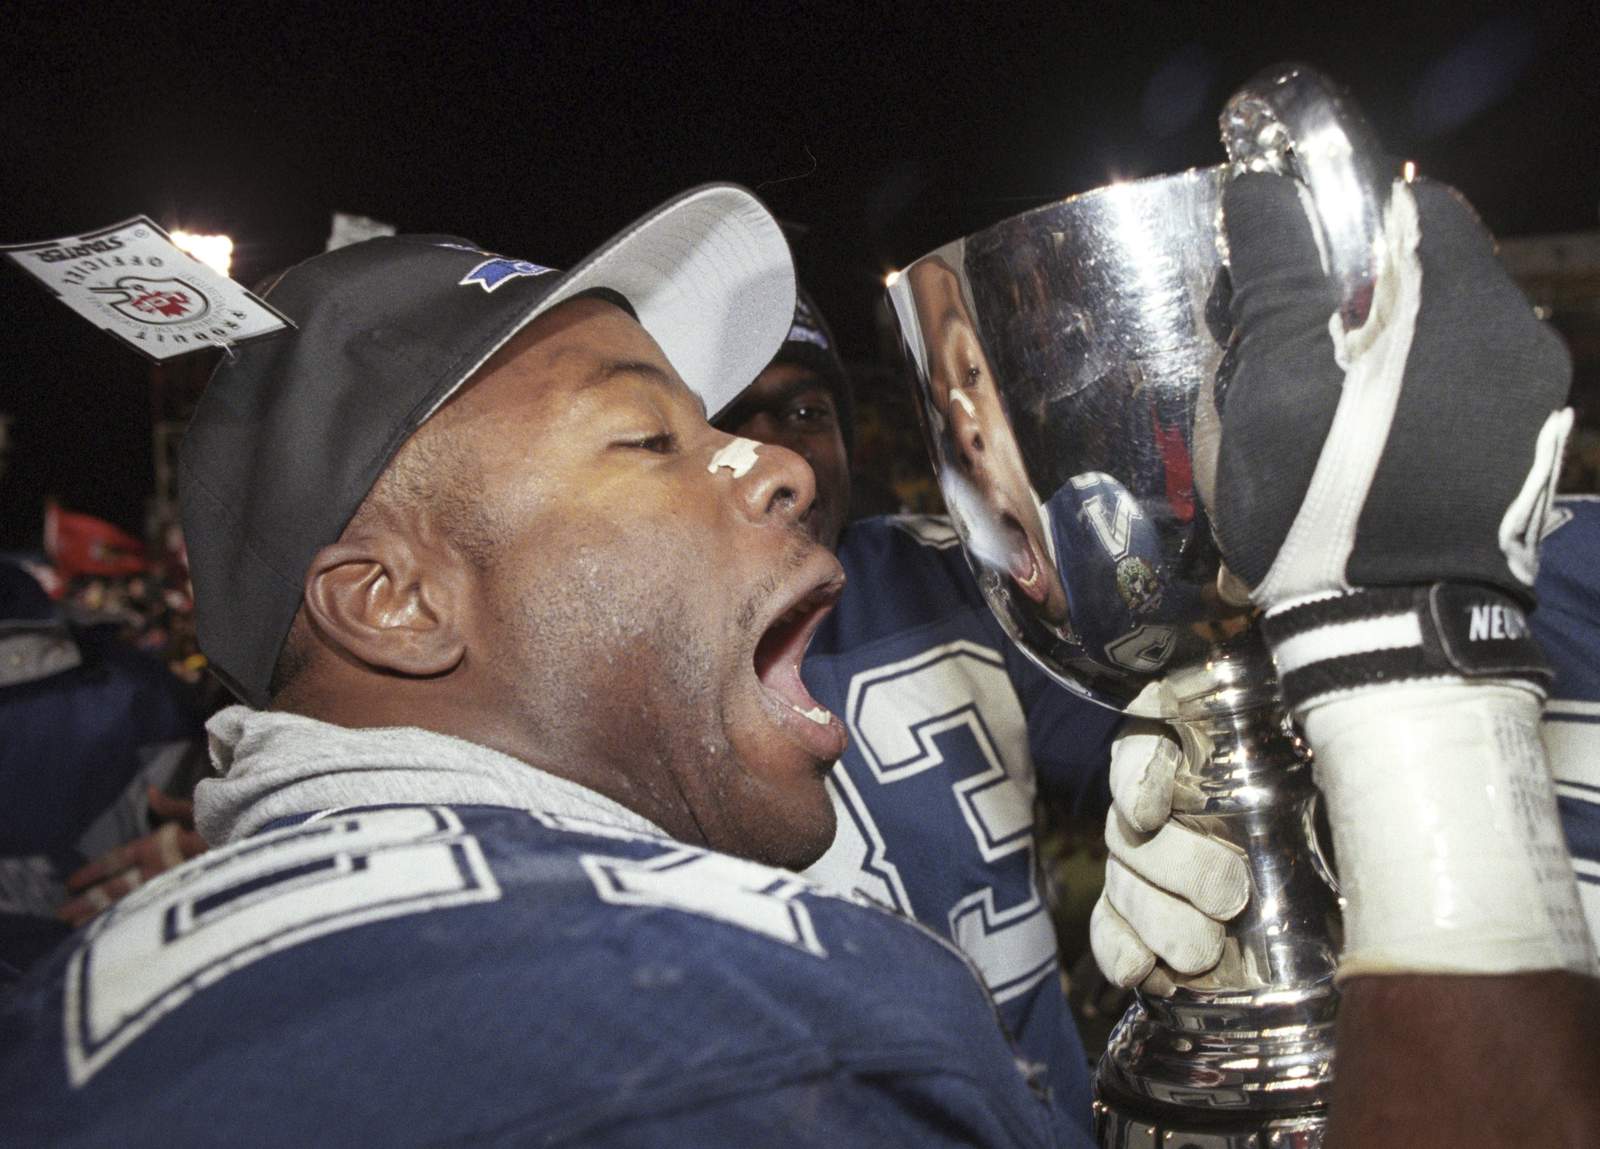 25 years ago, the Baltimore Stallions ruled the CFL